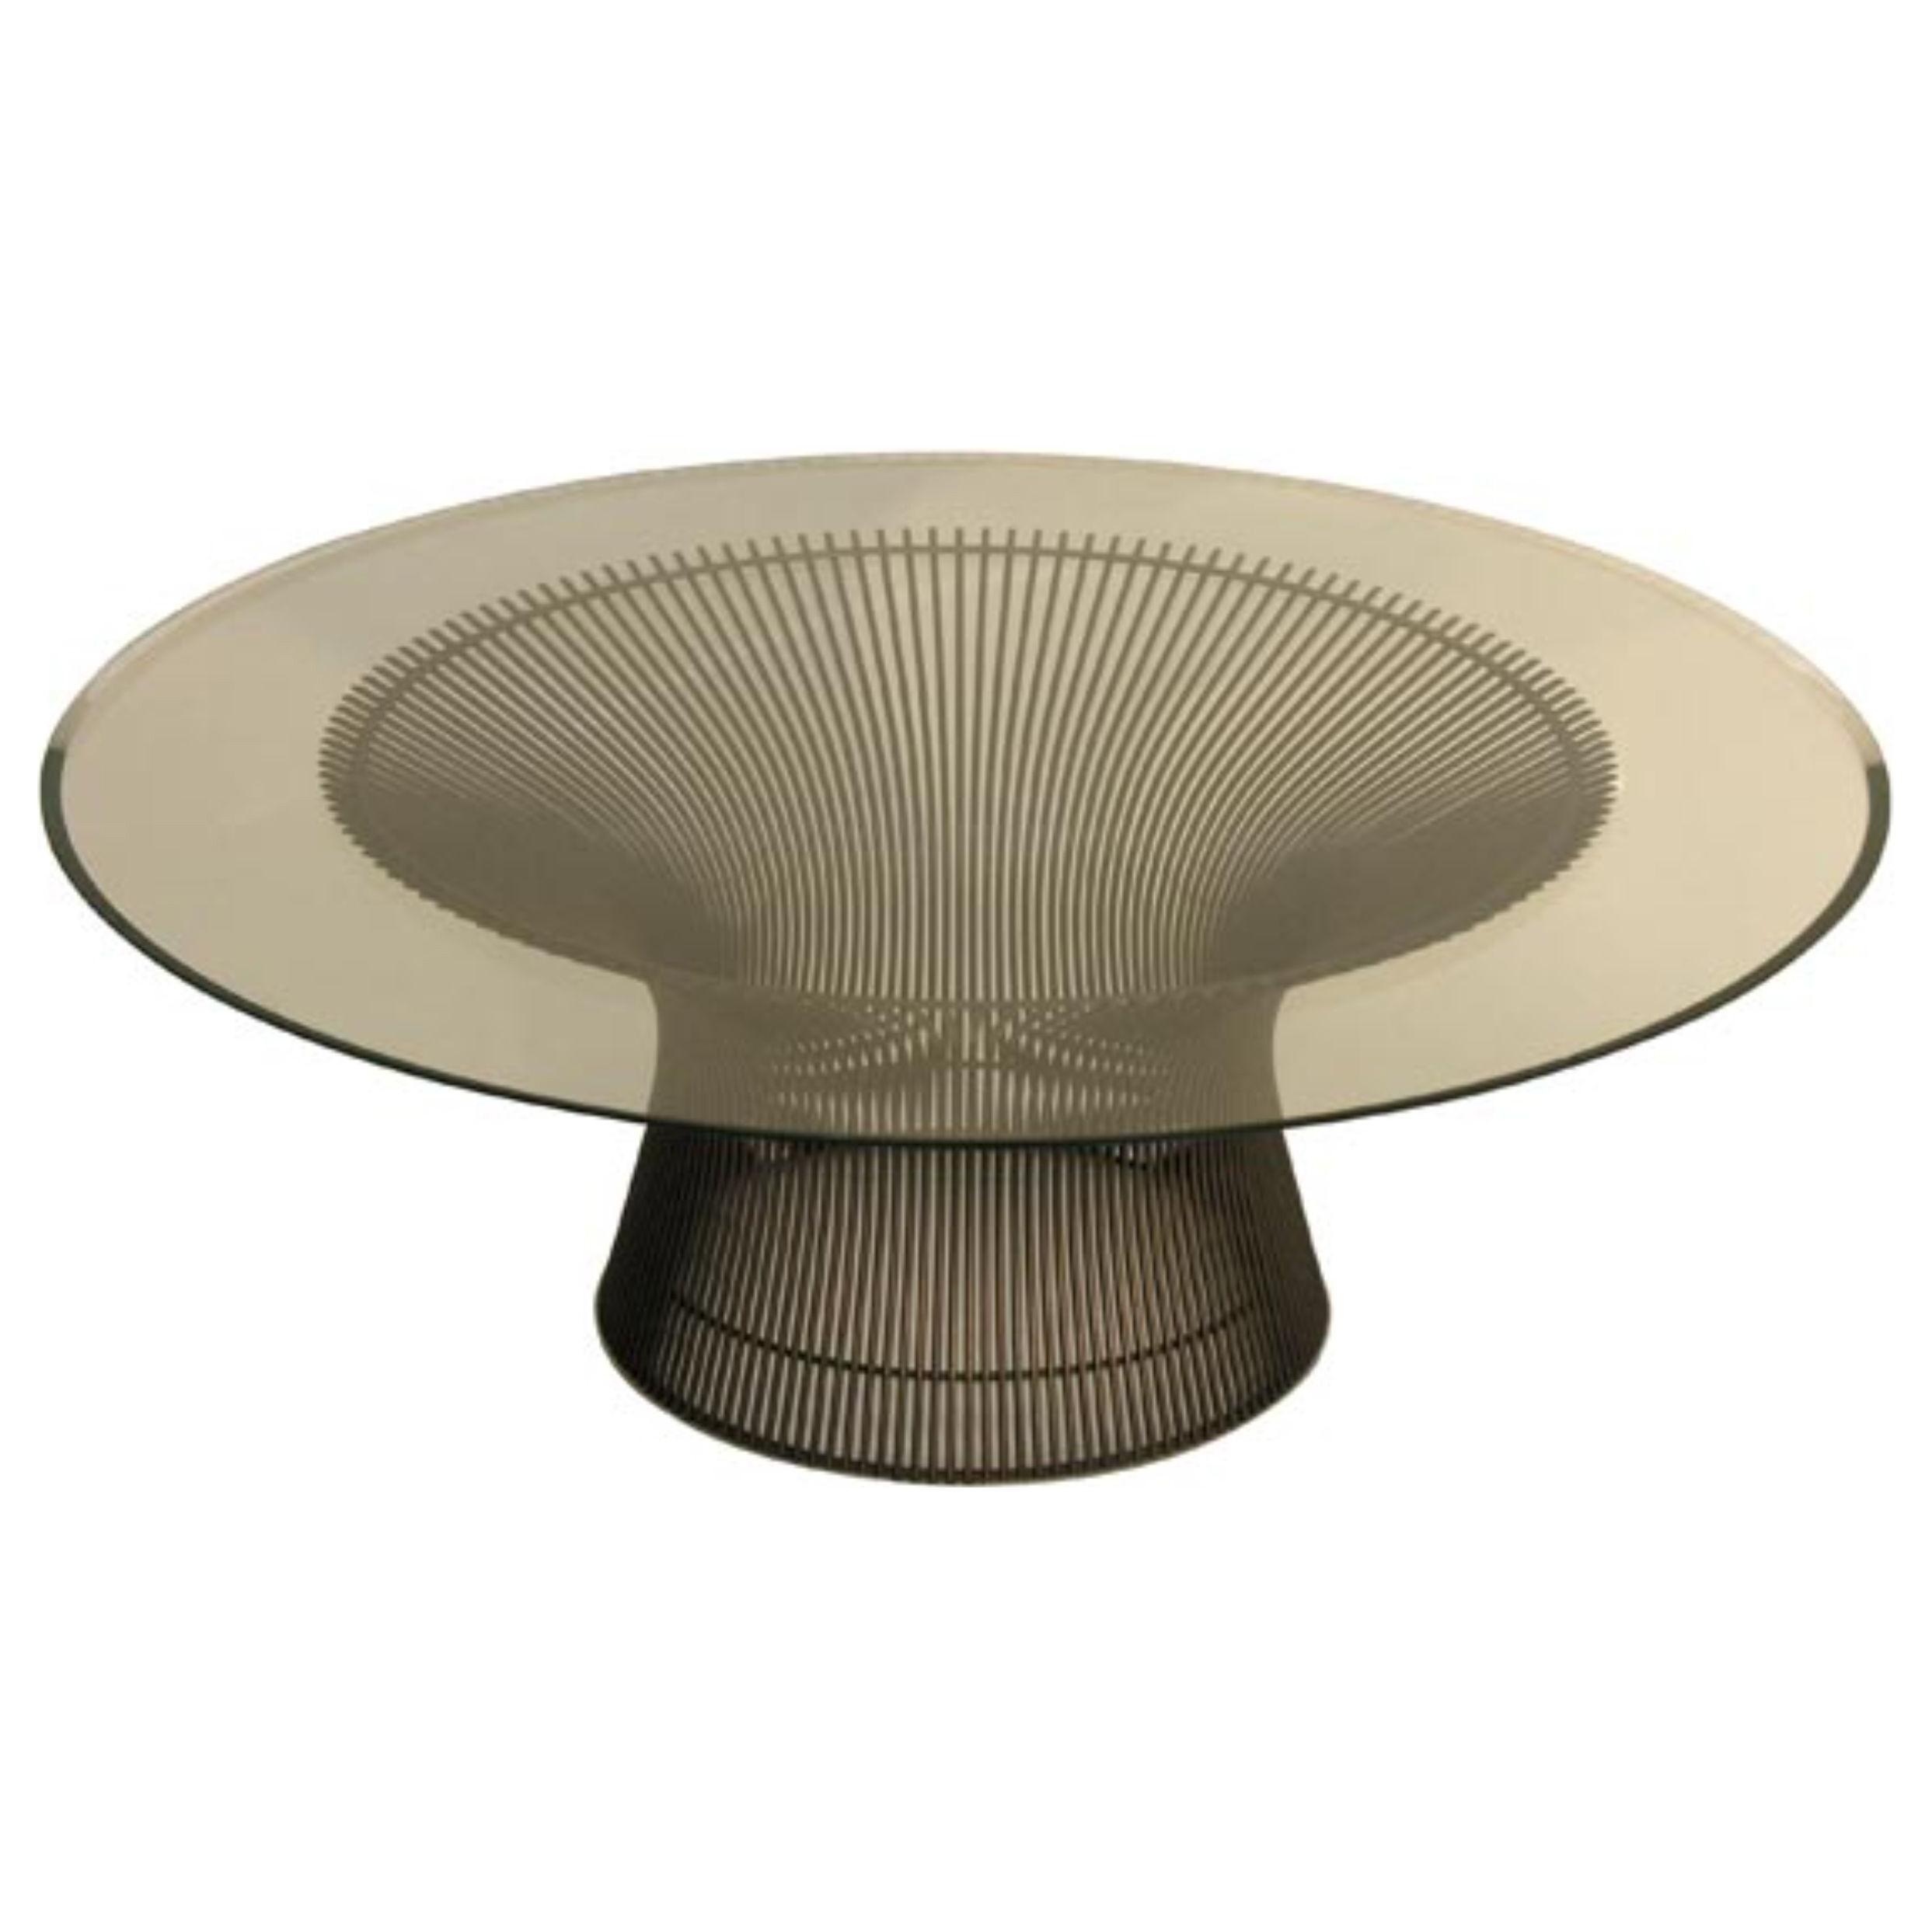 Mod Round Cocktail Table by Warren Platner for Knoll